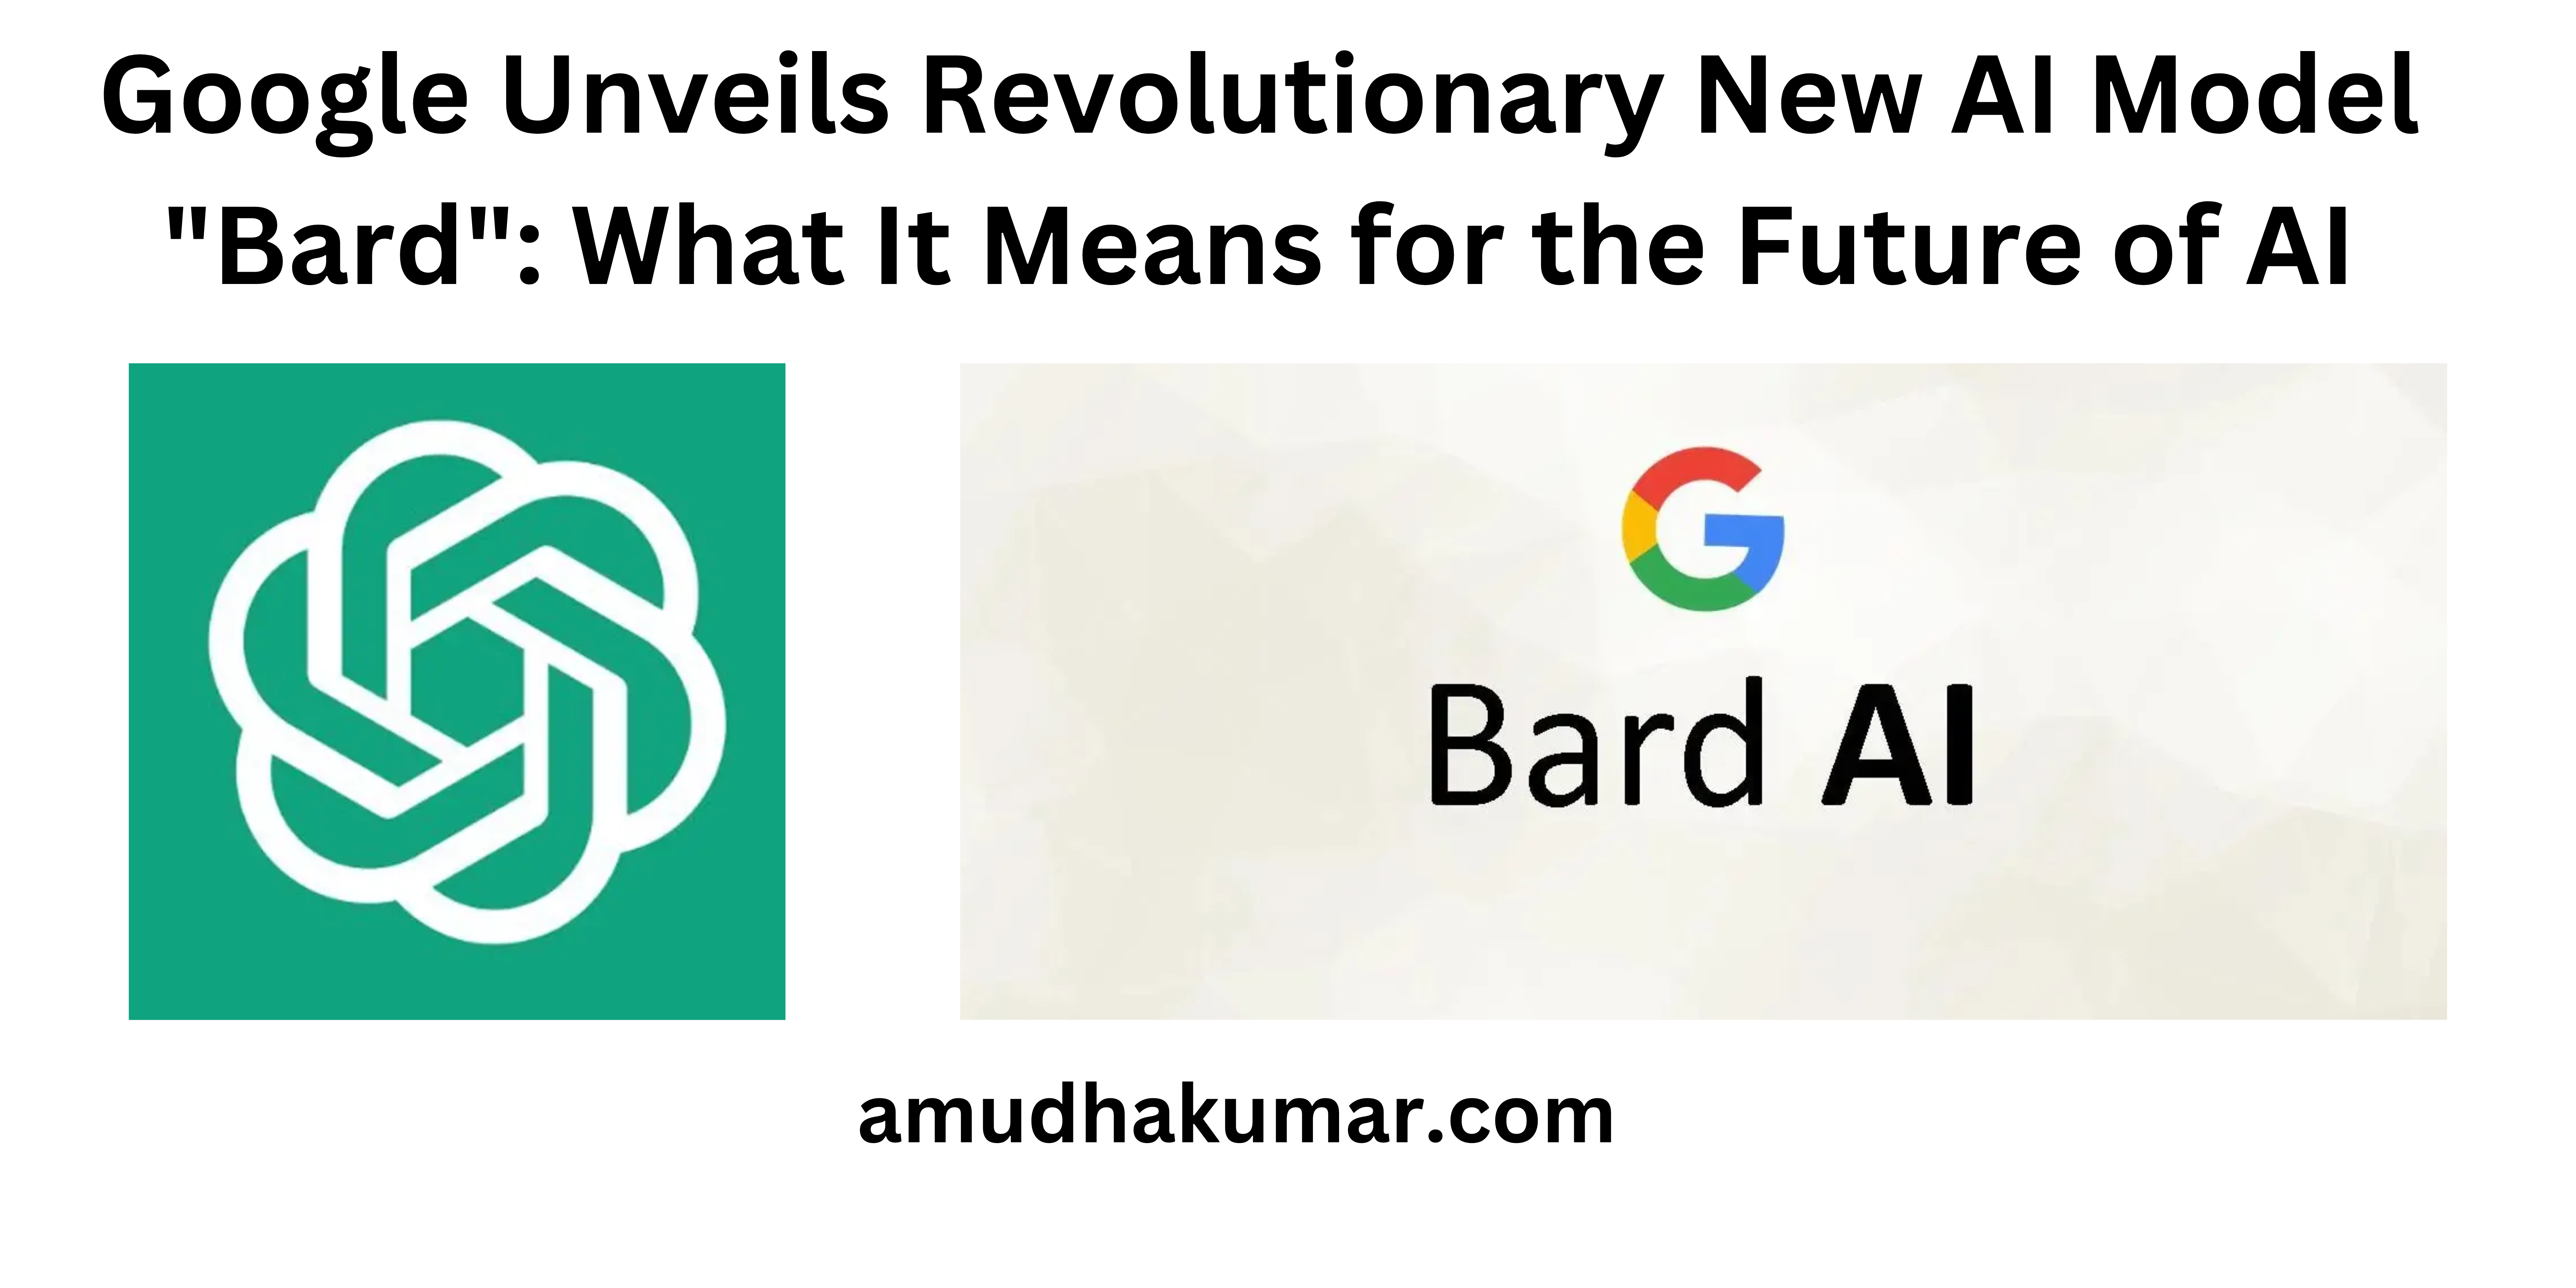 Google Unveils Revolutionary New AI Model "Bard": What It Means for the Future of AI